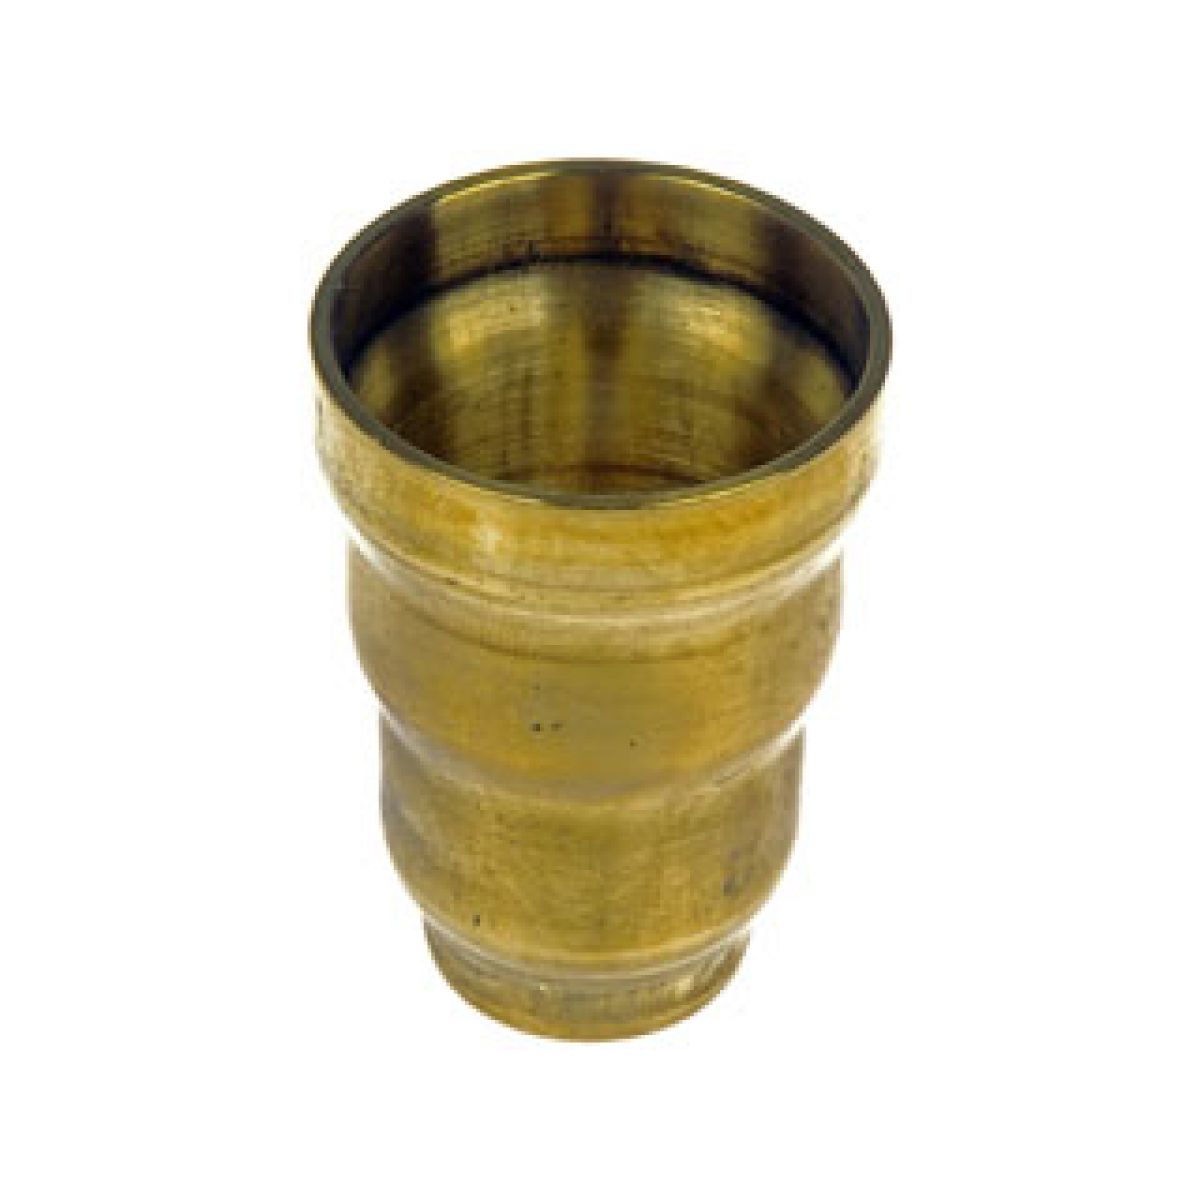 Ford diesel injector cups #7